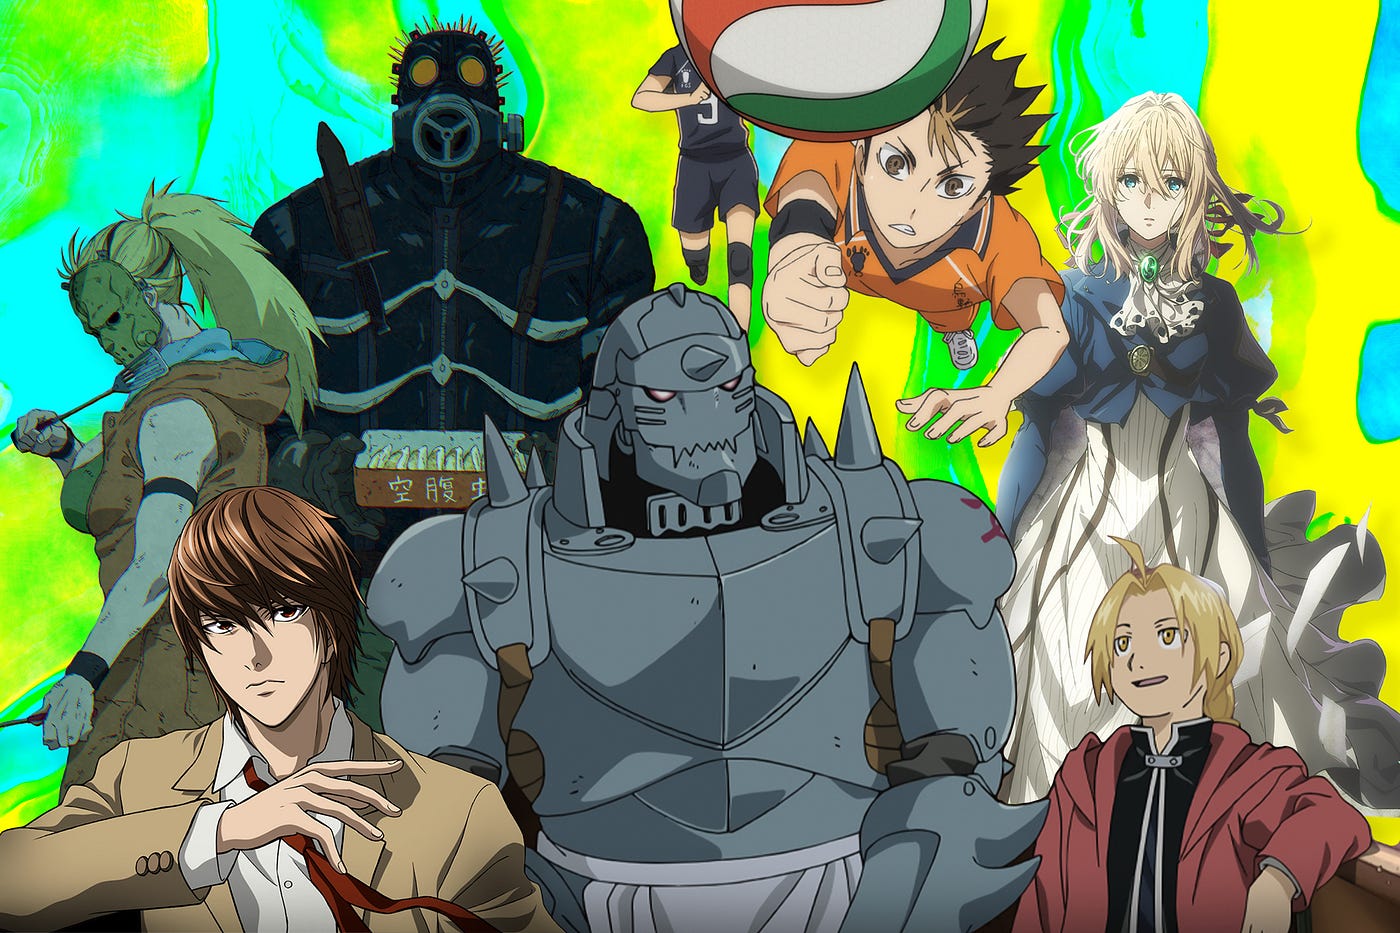 A Web-Based Analysis of the Top 100 Action Anime TV Shows